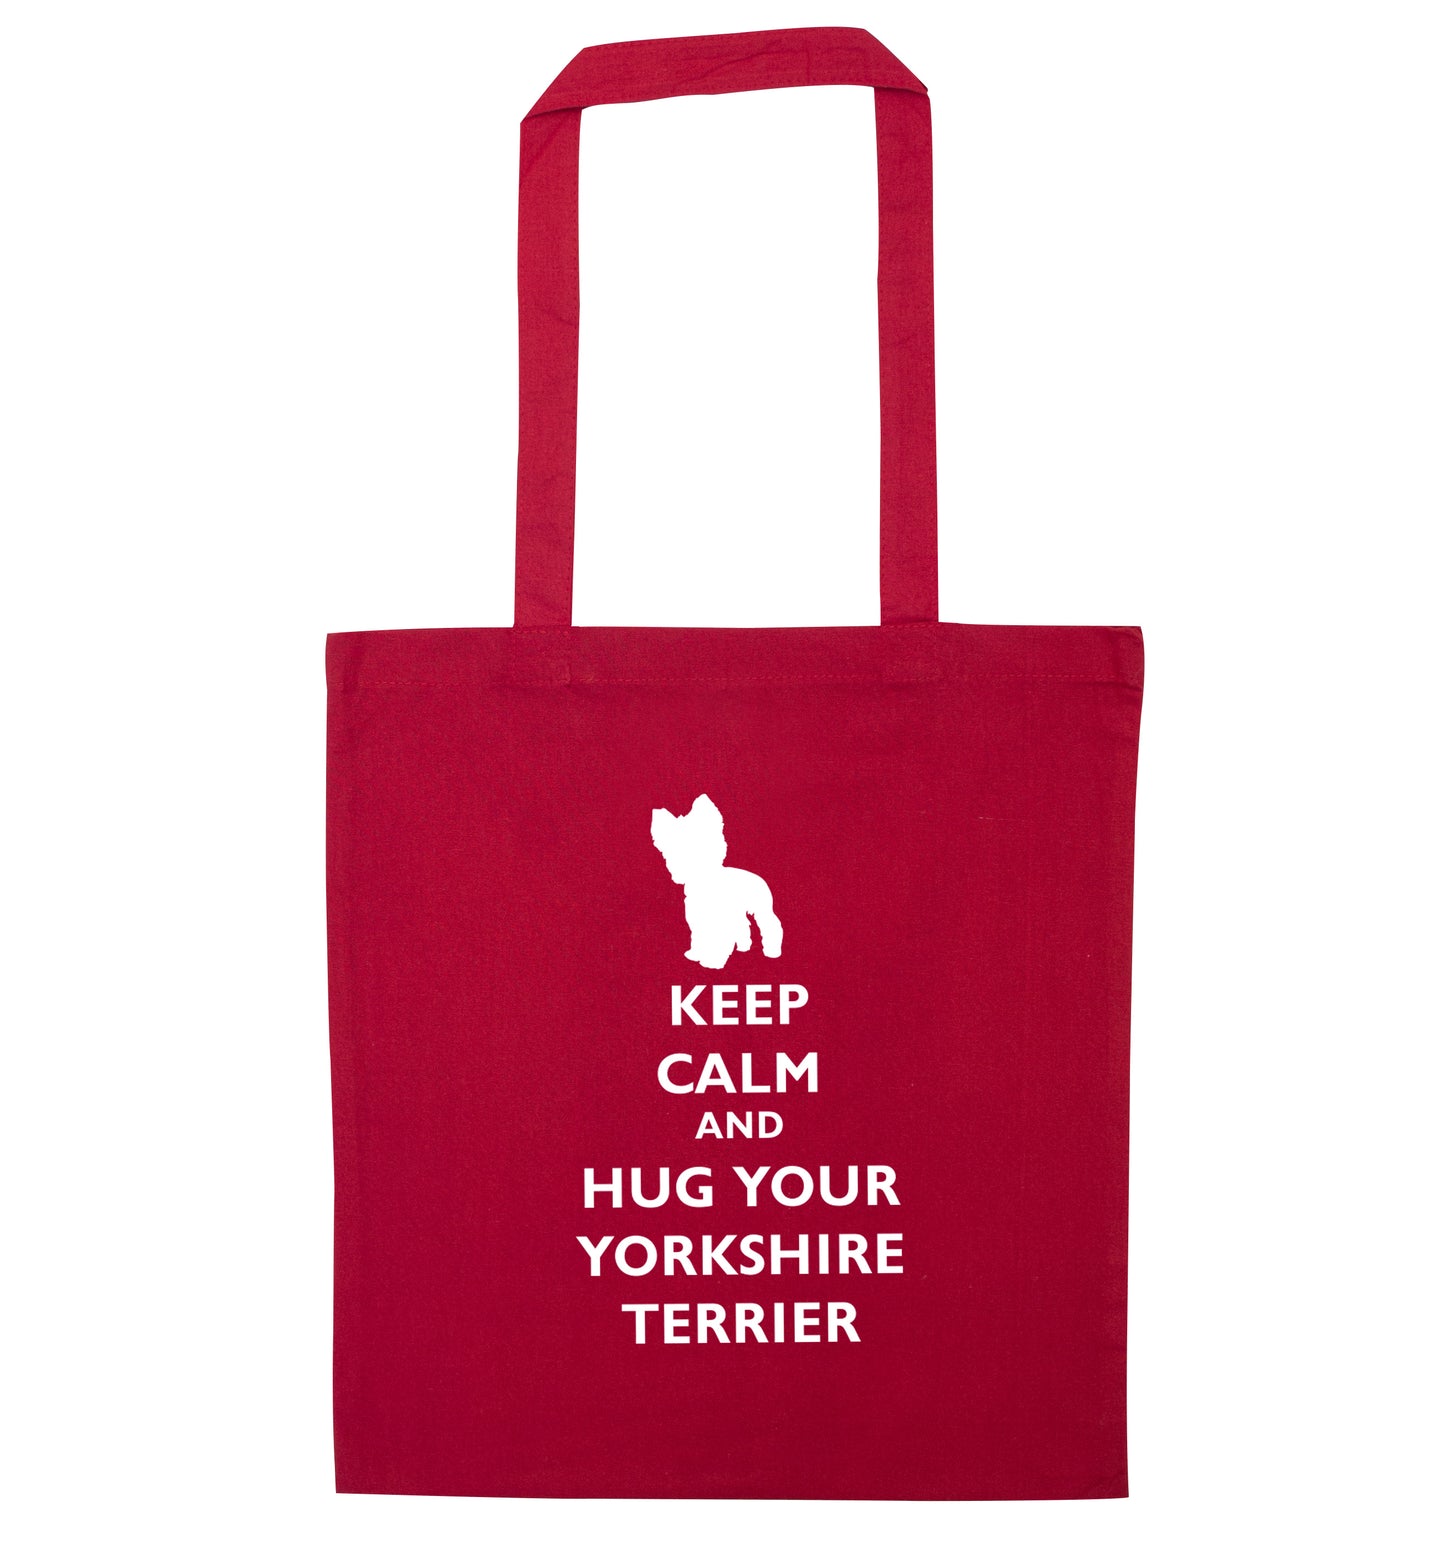 Keep calm and hug your yorkshire terrier red tote bag